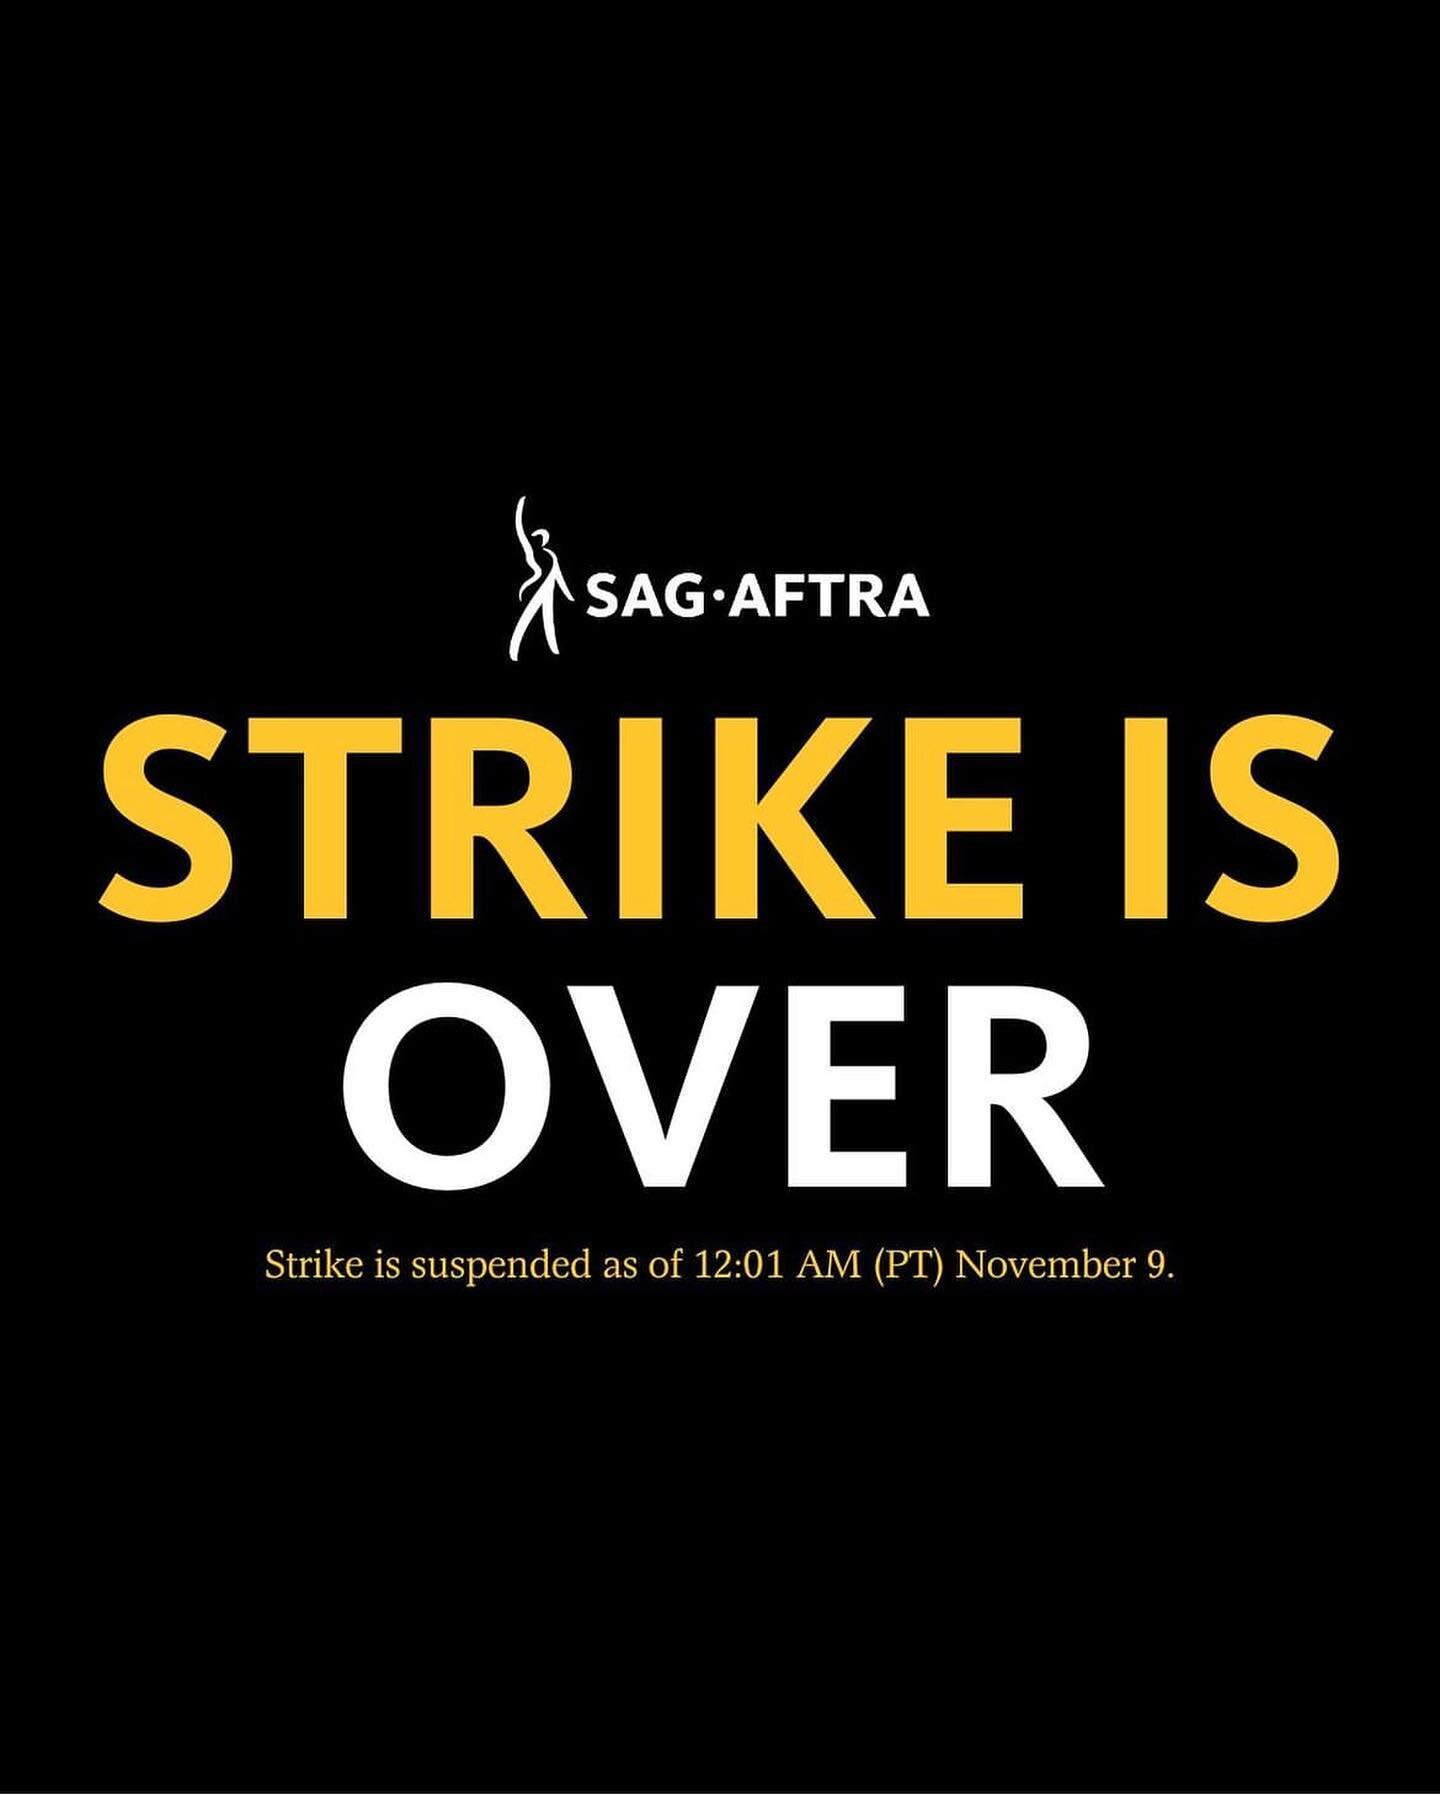 I have SO MUCH RESPECT for my union siblings that I saw grinding it out on the picket lines every day here in LA, and in NYC and around the country. Many SAG-AFTRA members kicked ass, of course, but also the WGA, Teamsters, and IATSE members who 100%